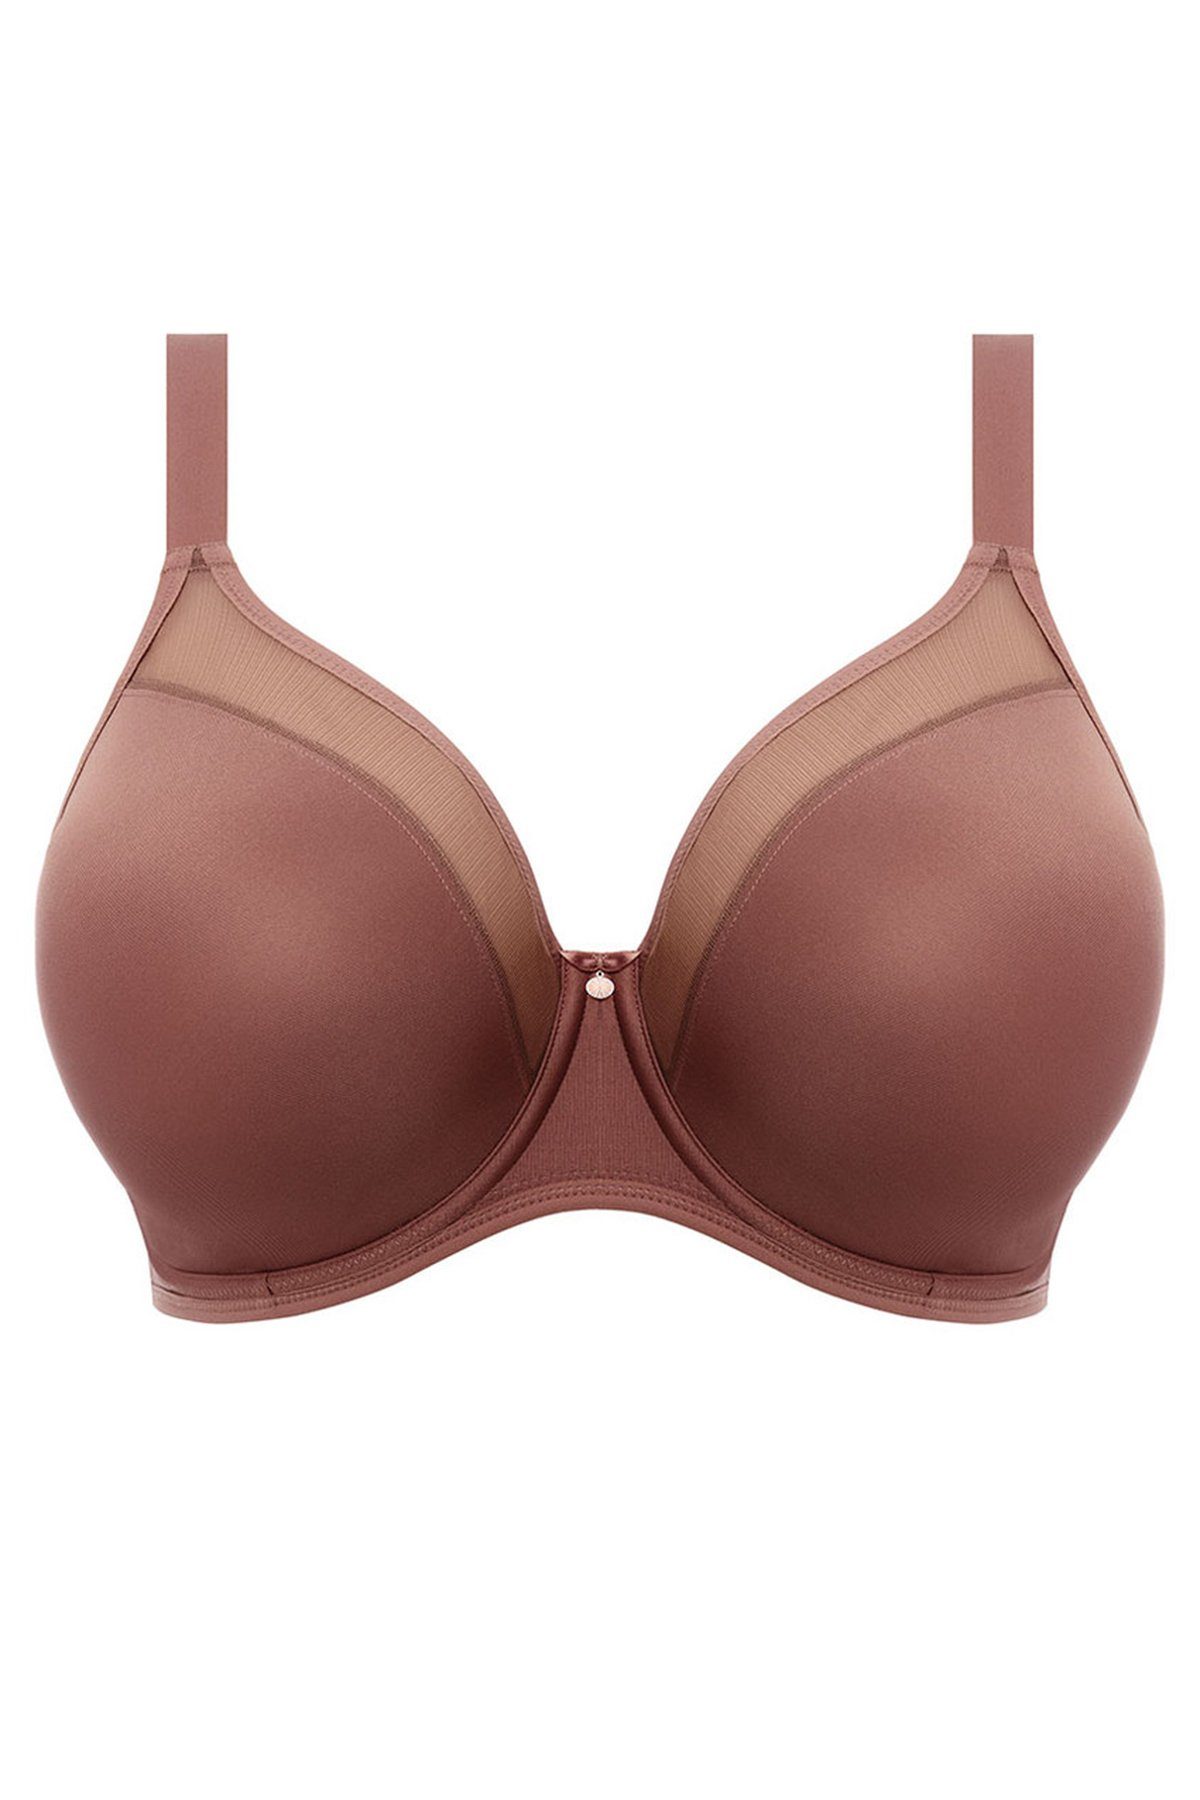 Elomi Soft-BH Smooth BH G-K Cup